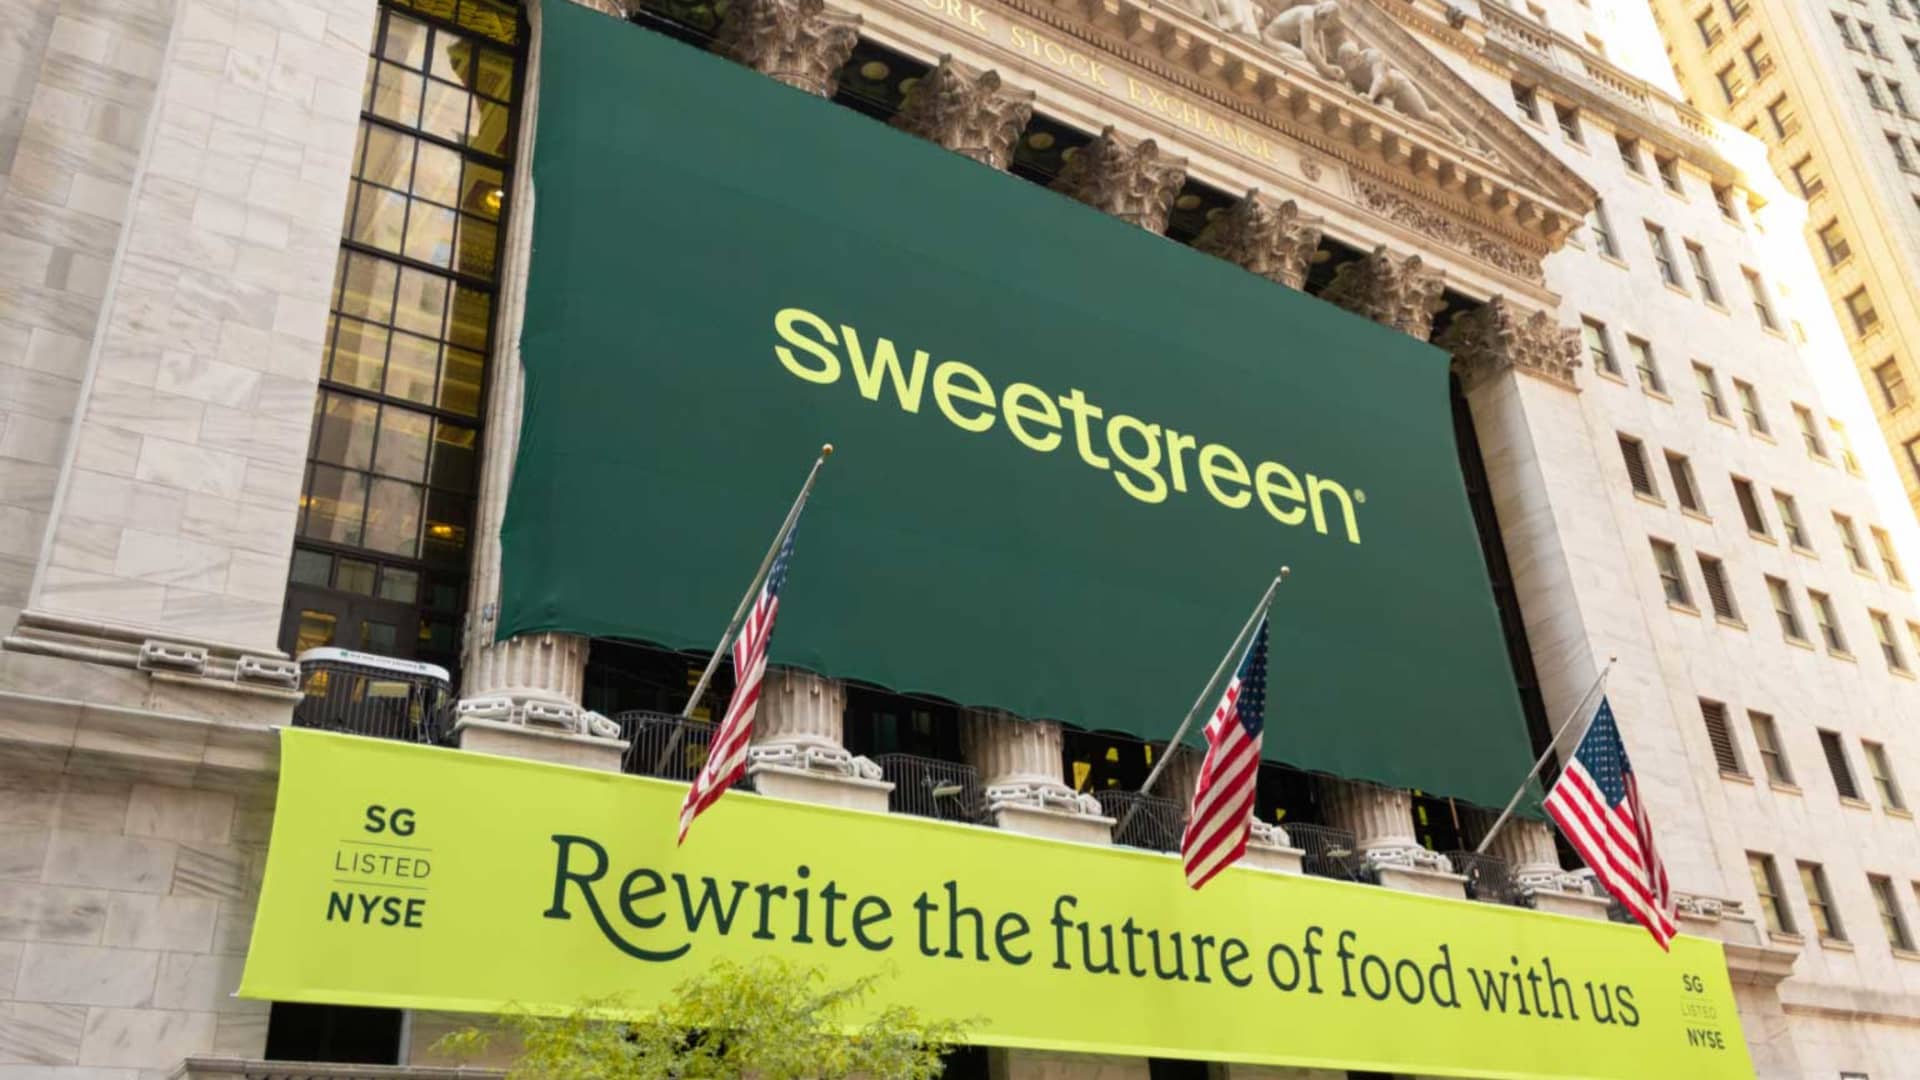 A Sweetgreen banner on the NYSE, November 18, 2021.